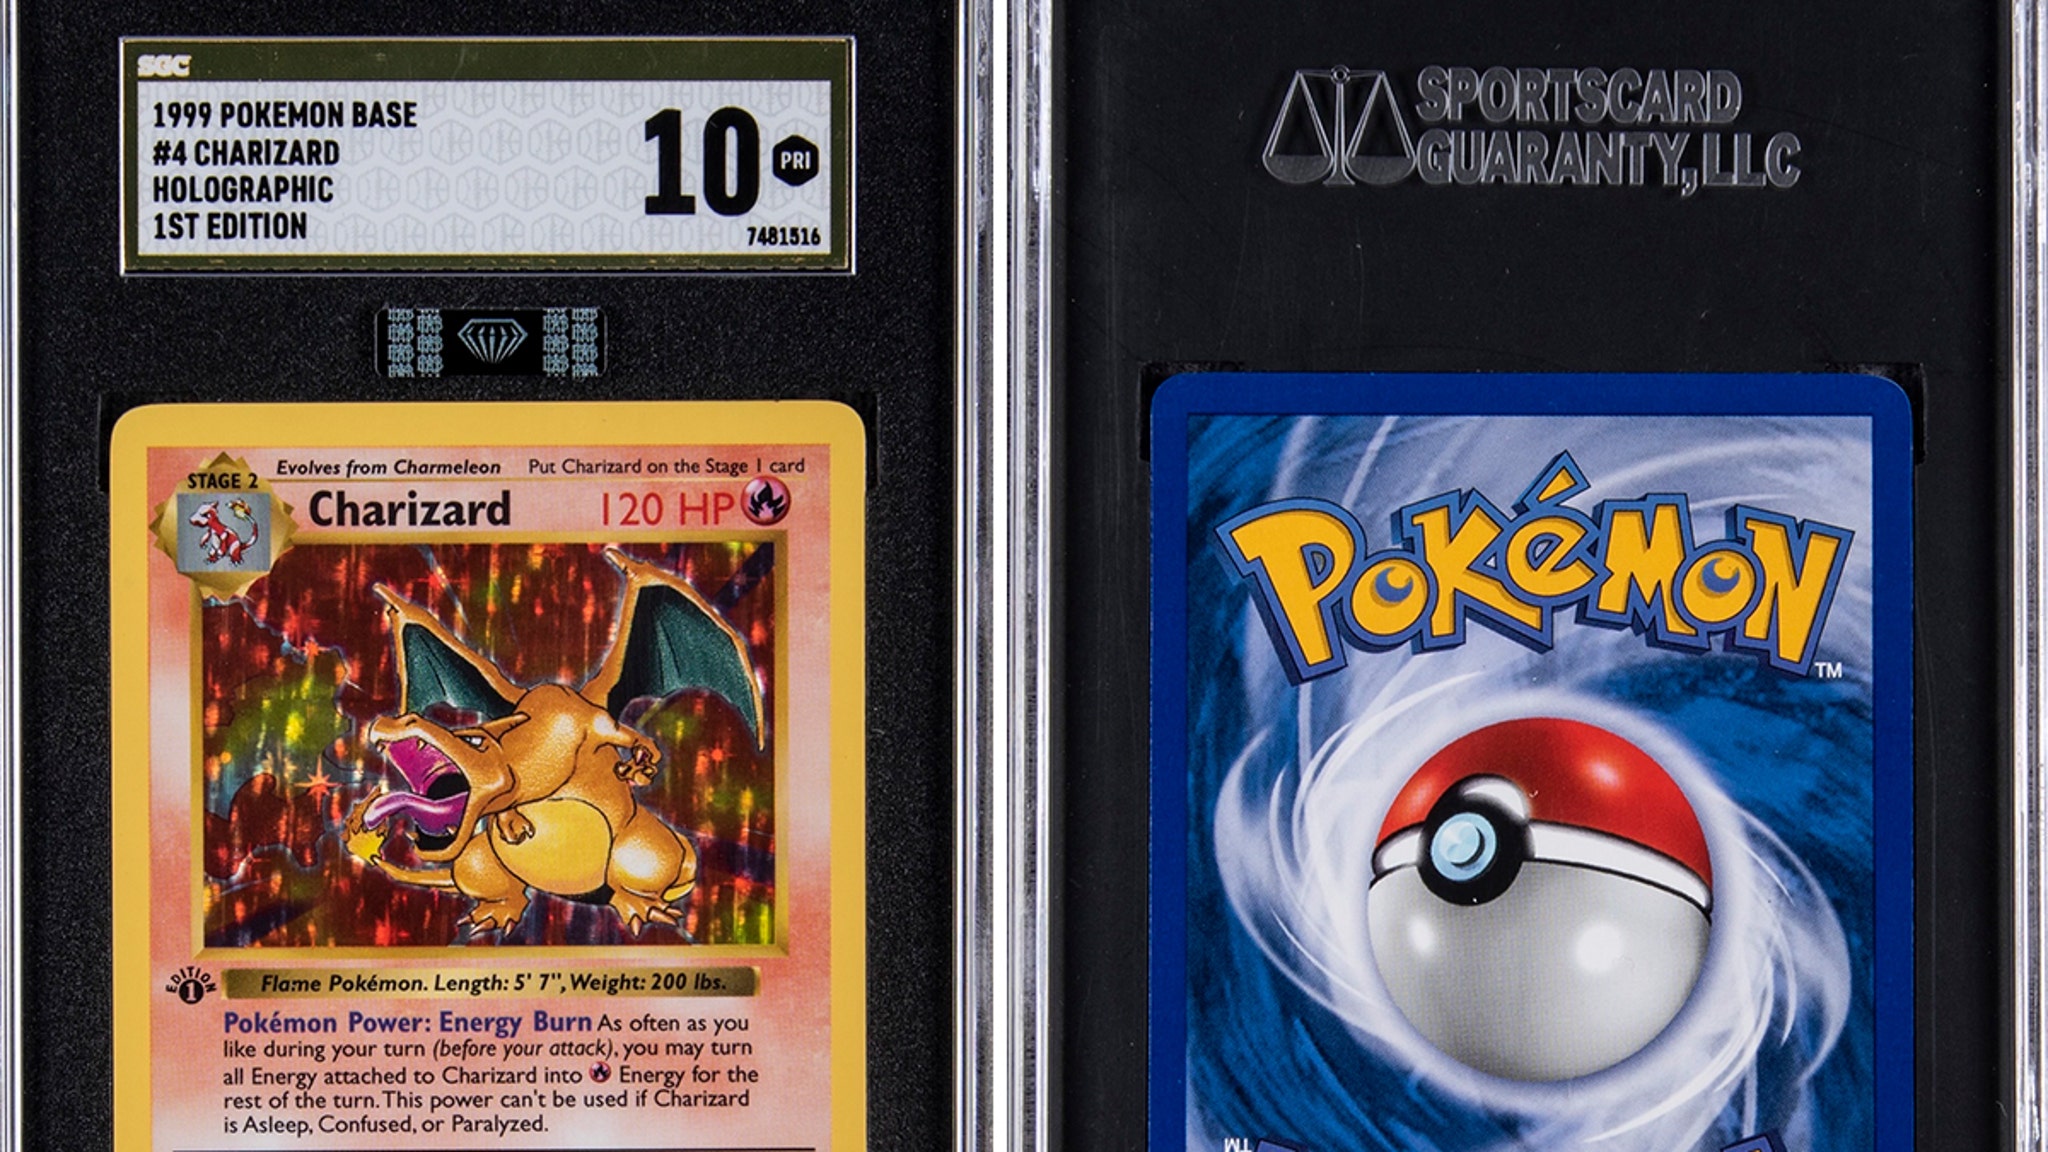 Rare Charizard Pokemon Card Could Fetch Half a Mil at Auction - TMZ